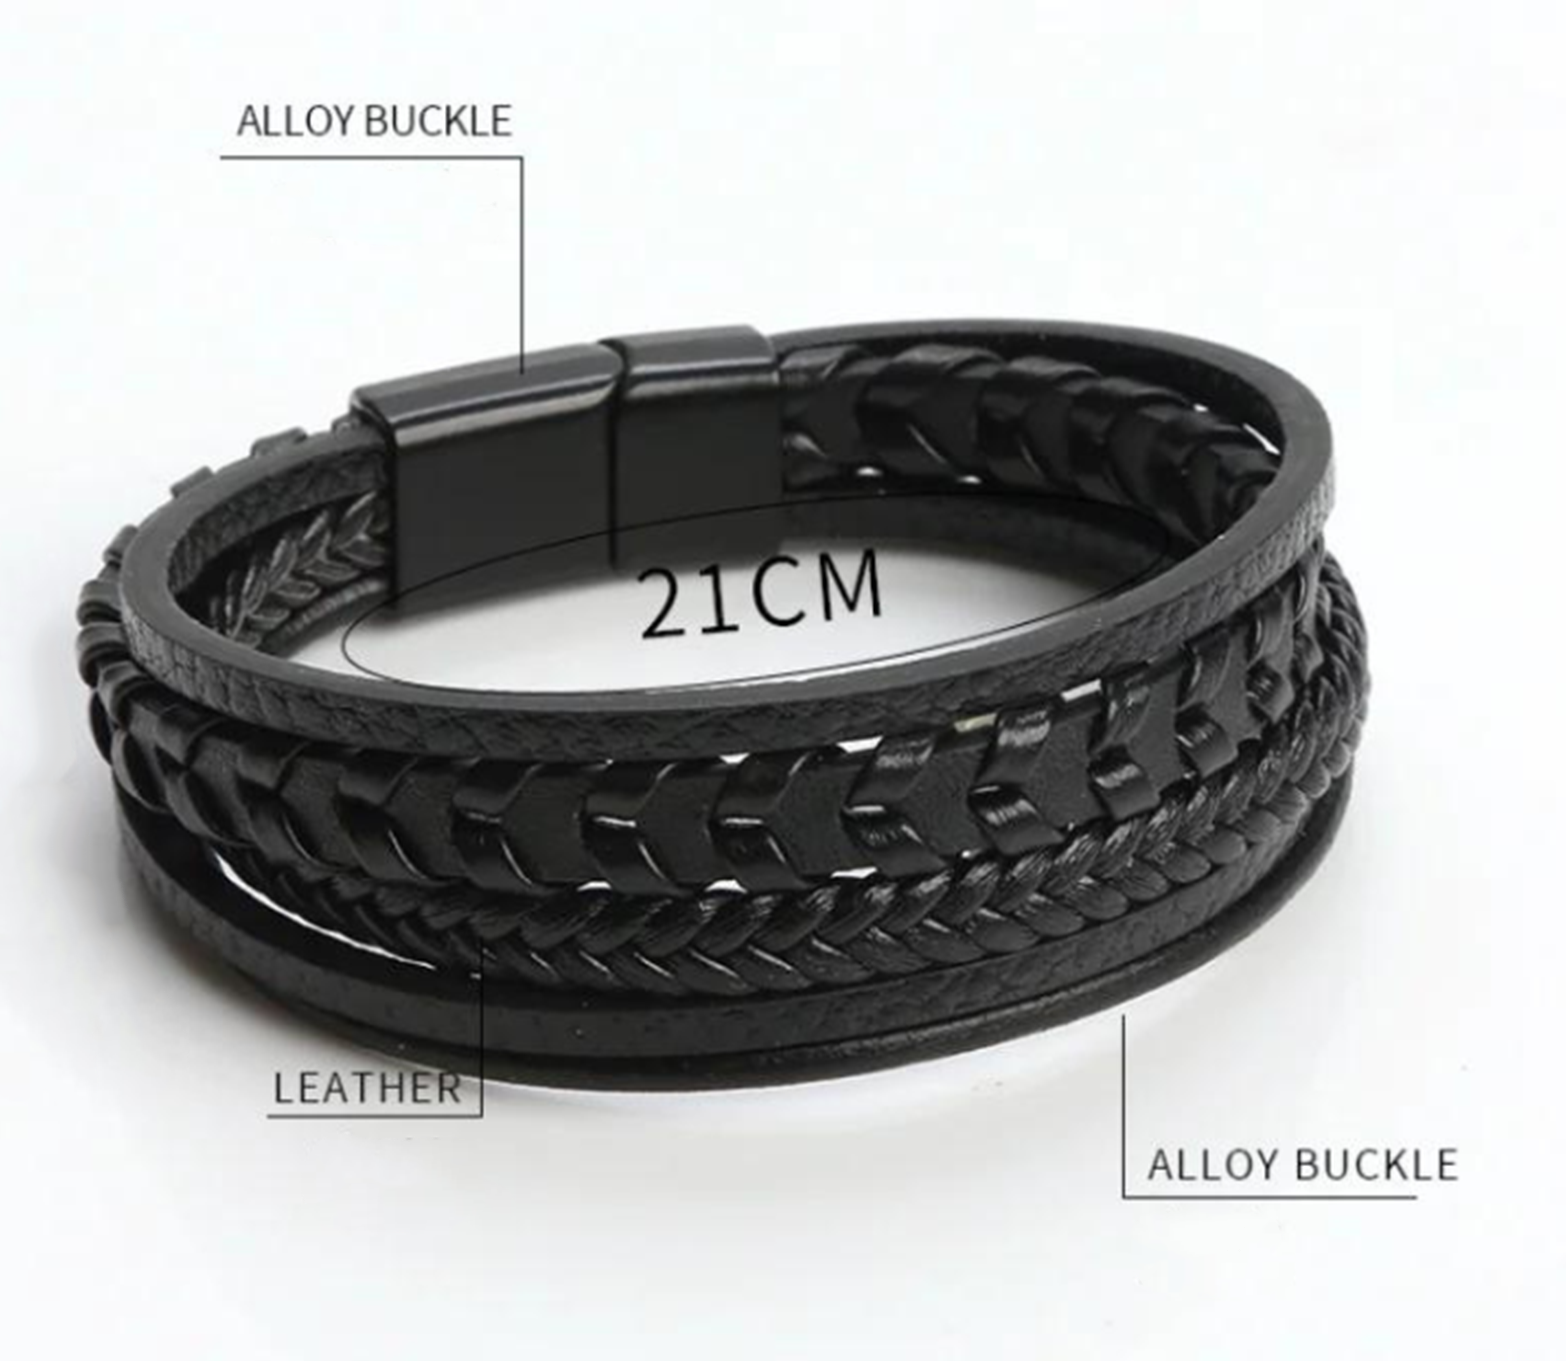 Stylish and Durable: Genuine Leather Bracelets for Men